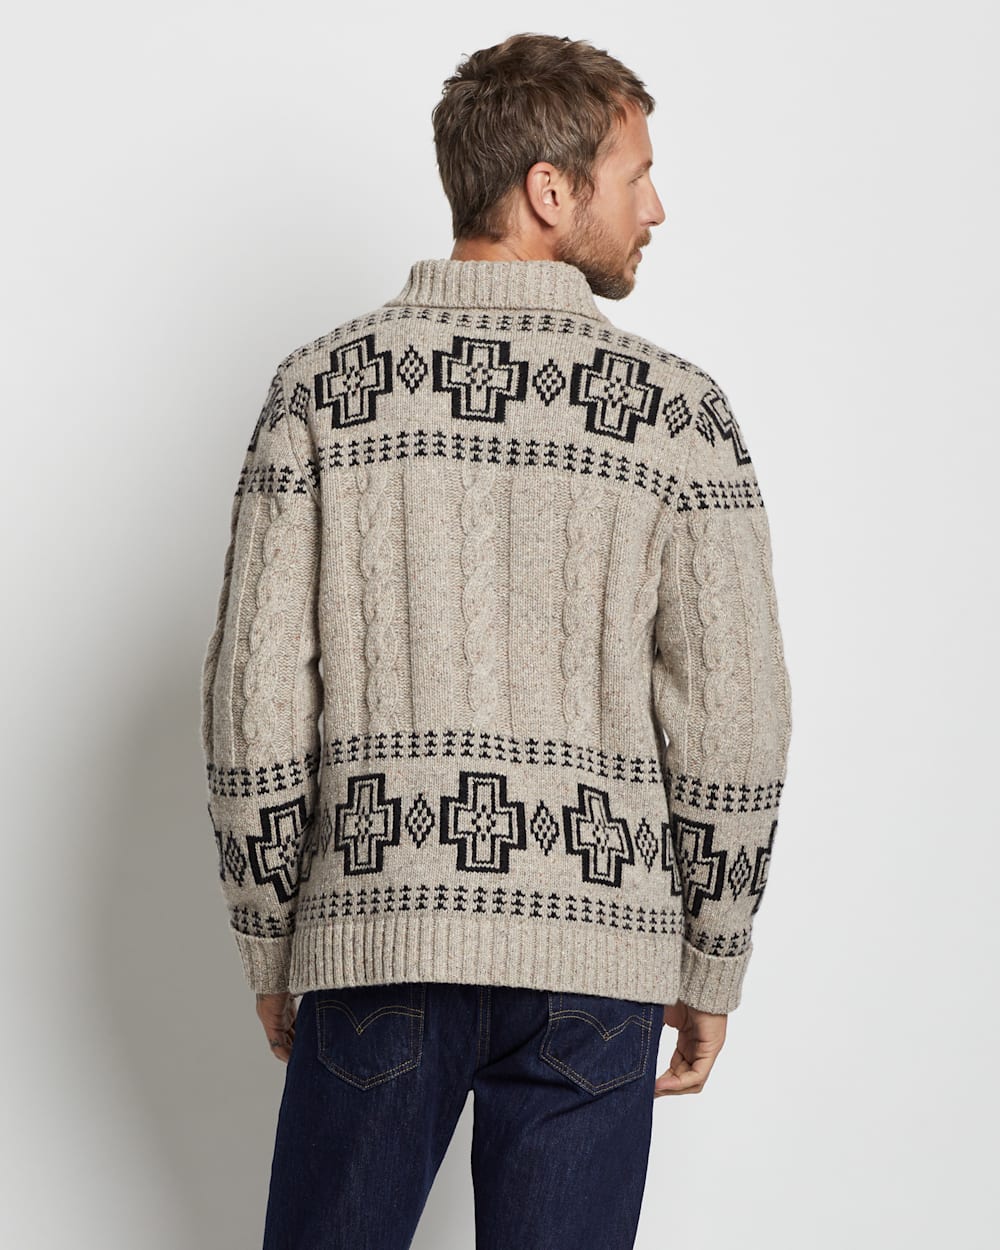 ALTERNATE VIEW OF MEN'S CABLE CROSS LAMBSWOOL CARDIGAN IN NATURAL DONEGAL image number 6